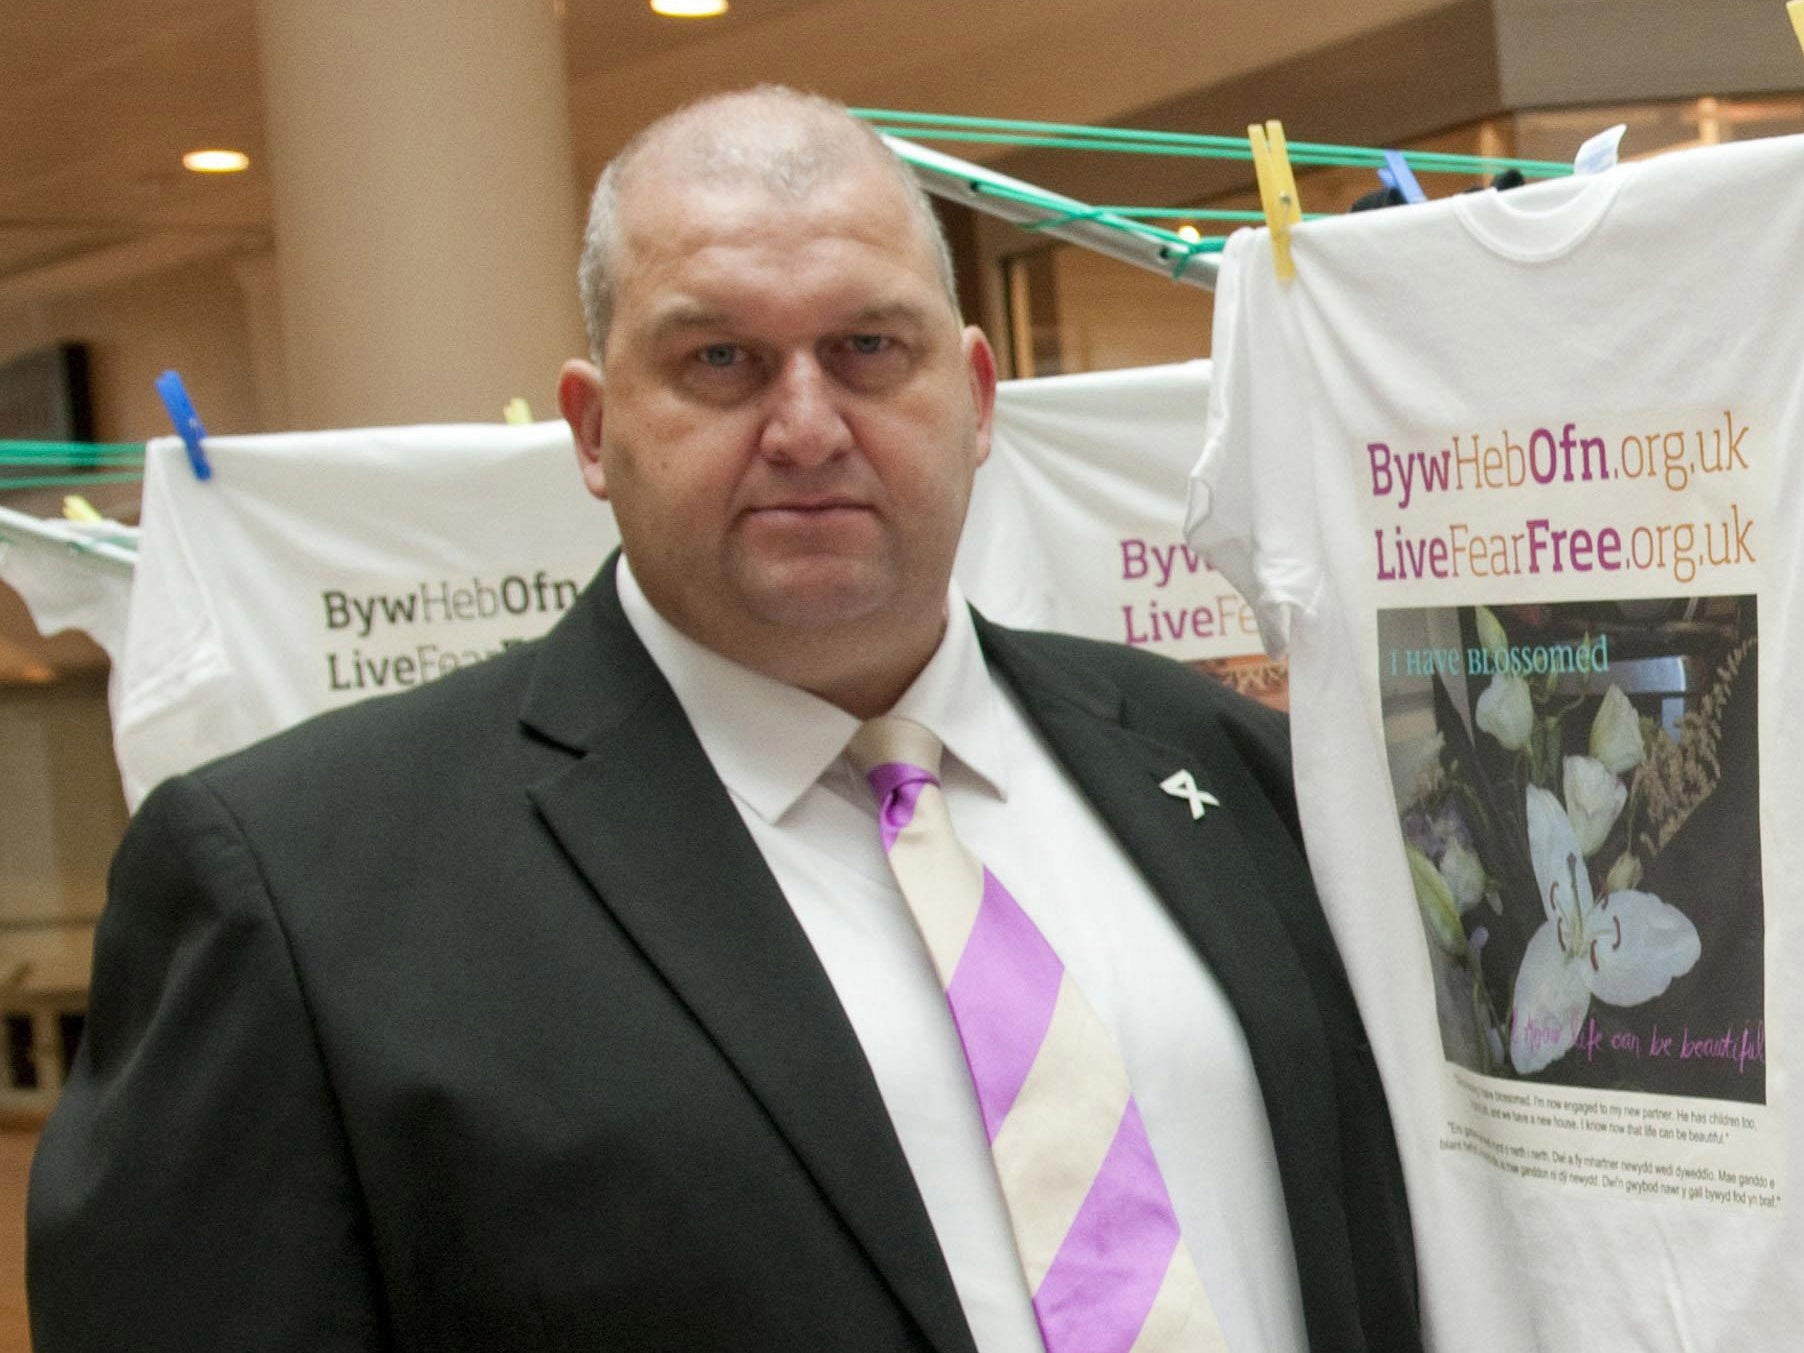 Carl Sargeant has been found dead four days after he lost his Welsh cabinet job amid allegations